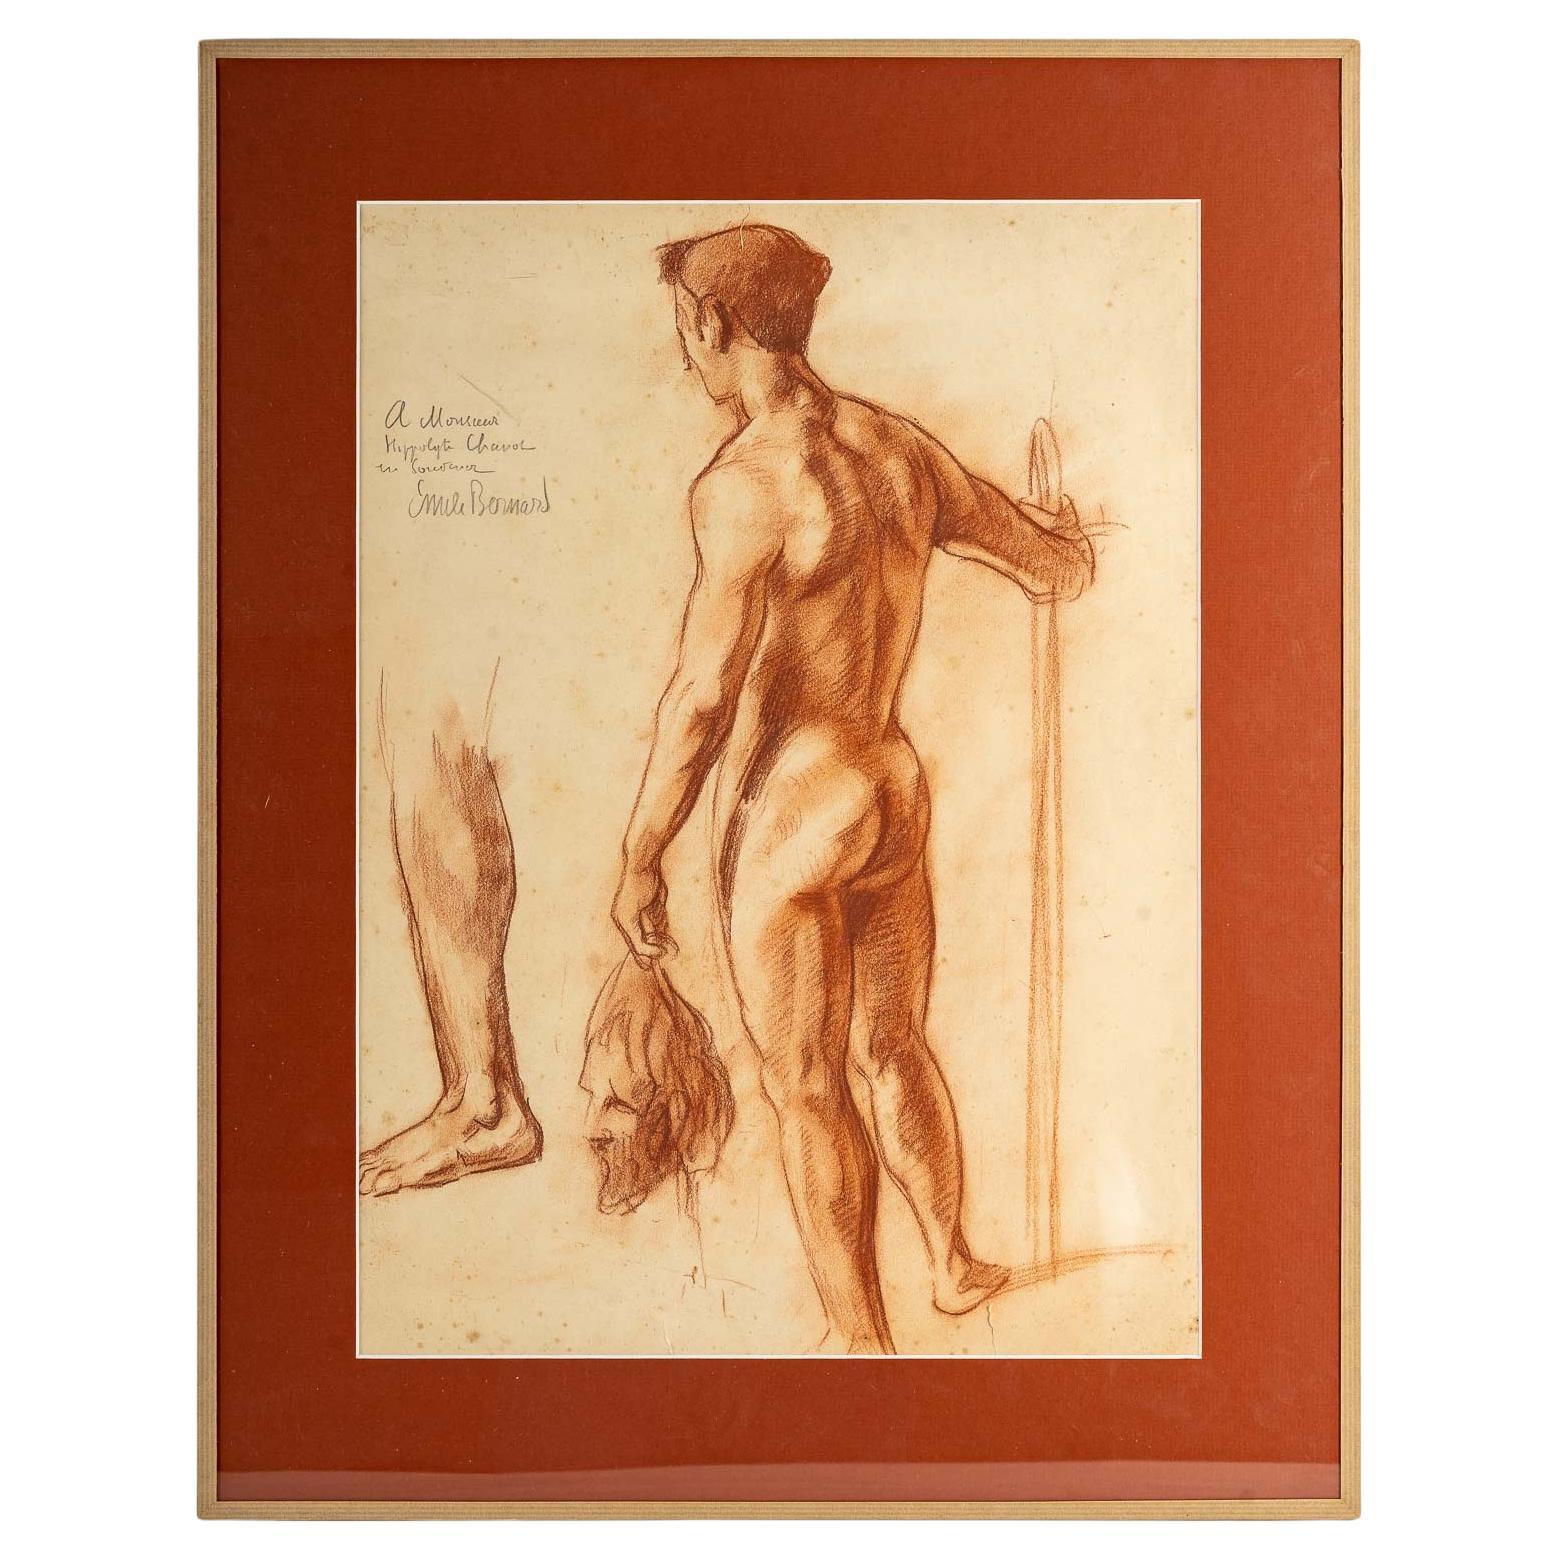 Sanguine of Emile Bernard, Anatomical Drawing Recto and Verso